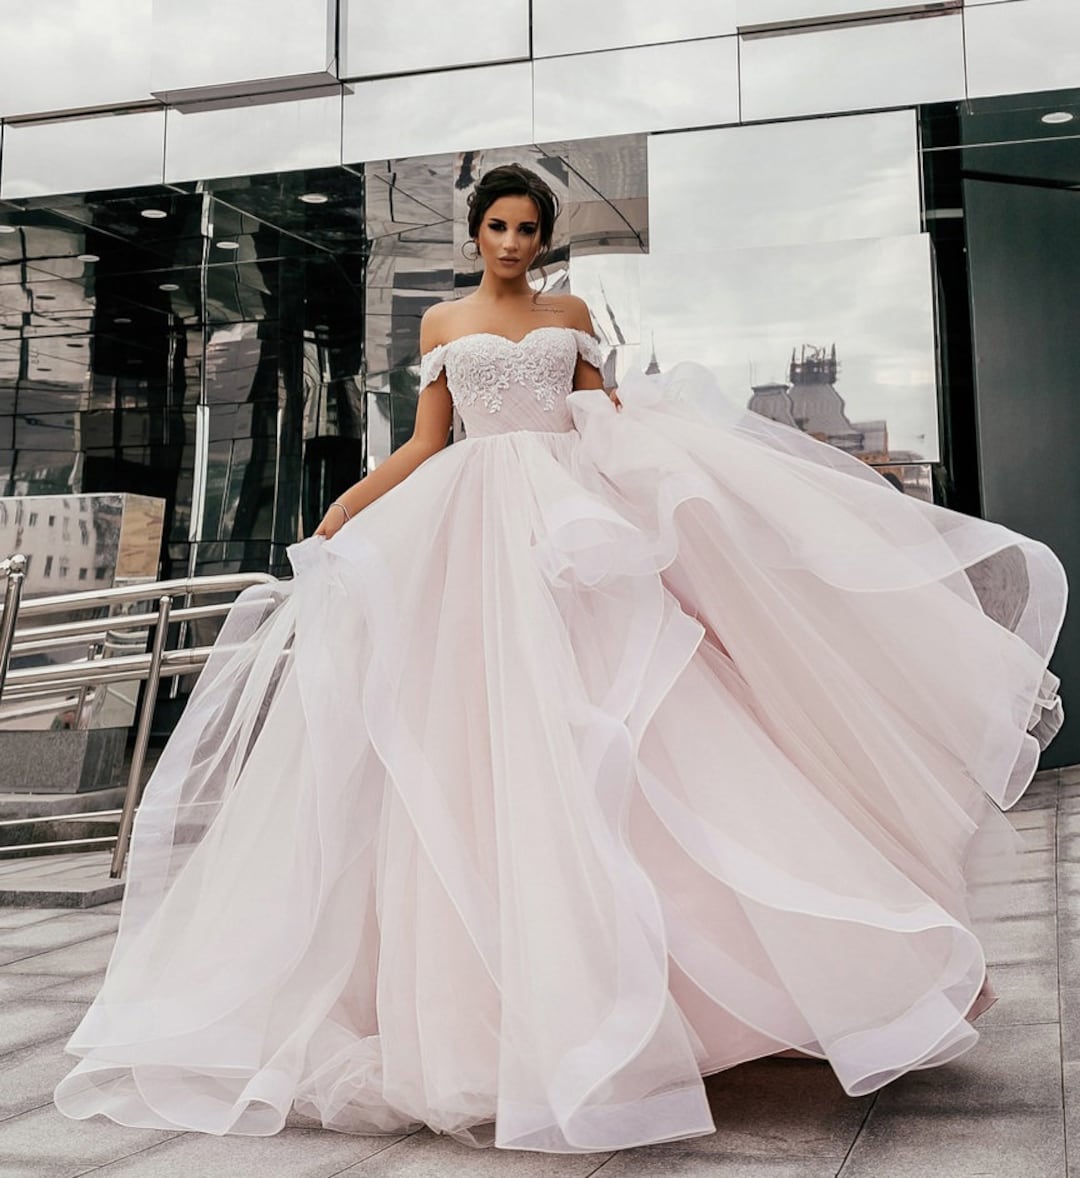 Off-the-Shoulder Wedding Dresses in Auckland - Dell'Amore Bridal